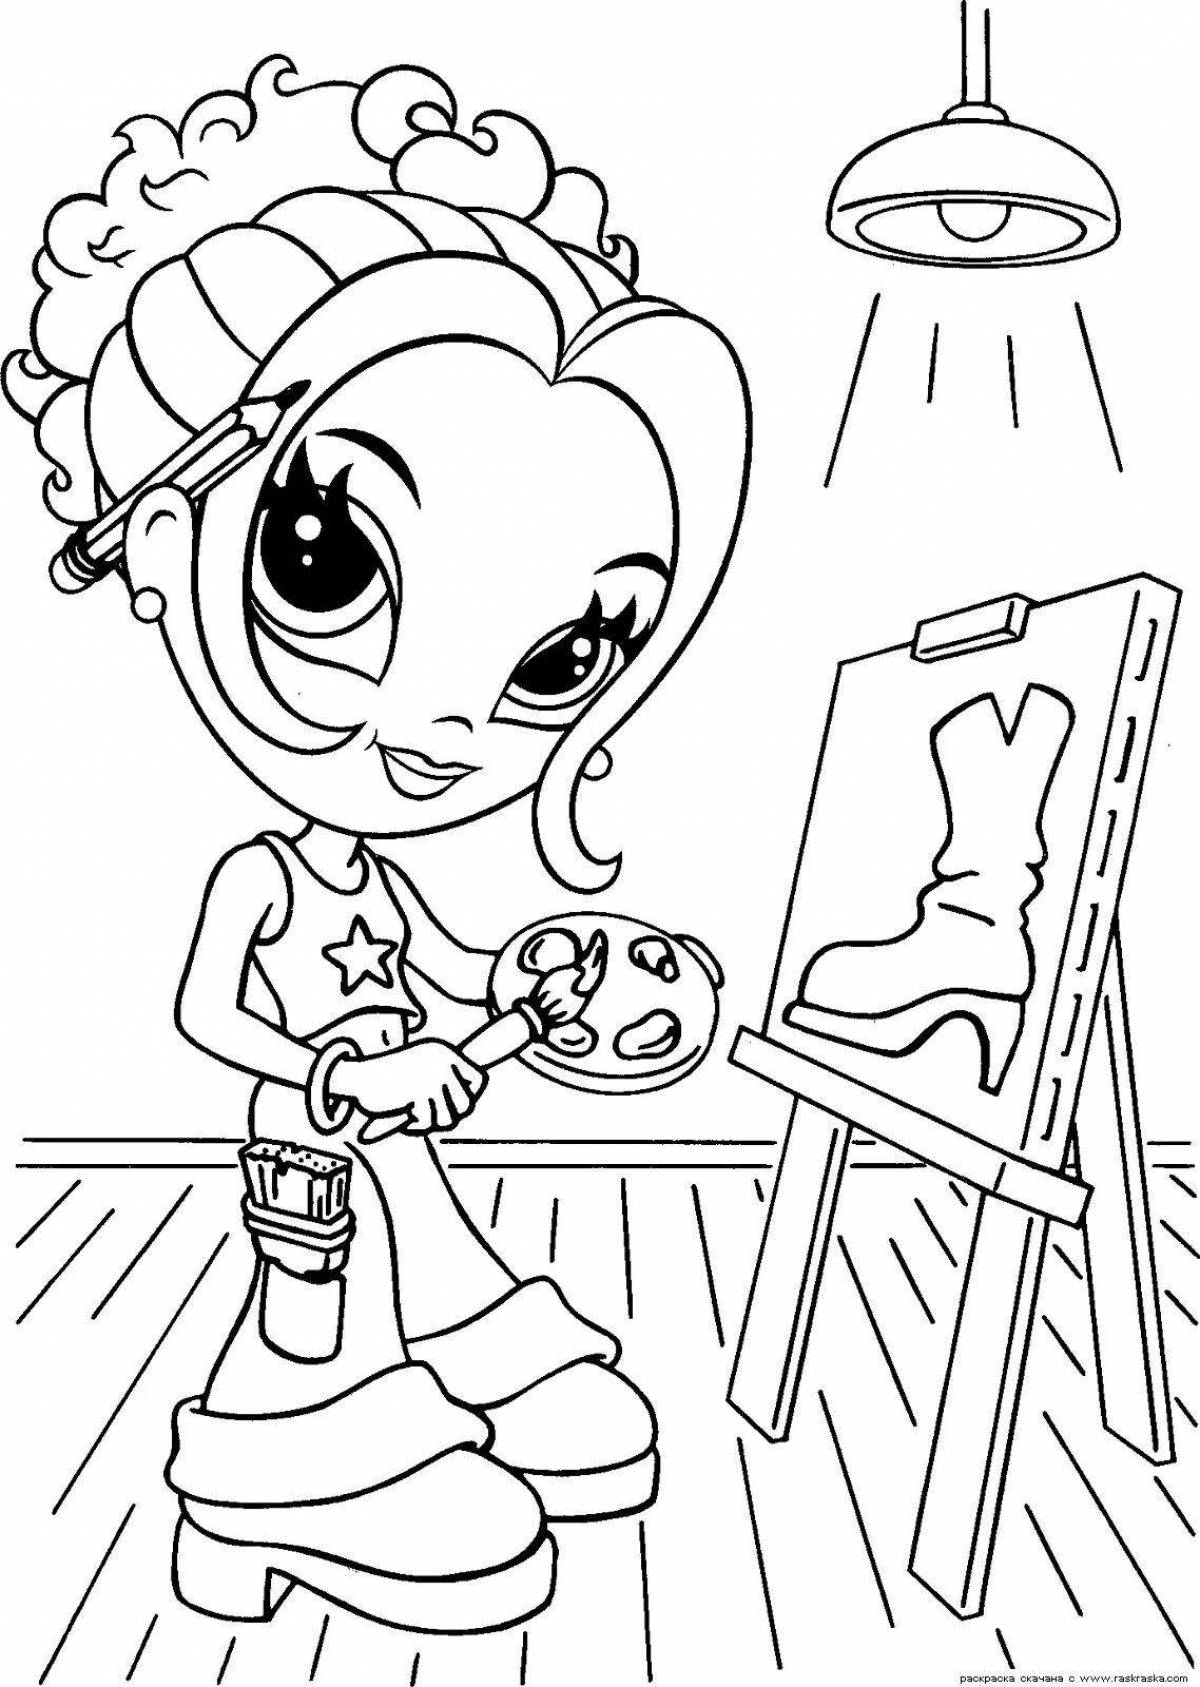 Fun coloring for girls 5 years old